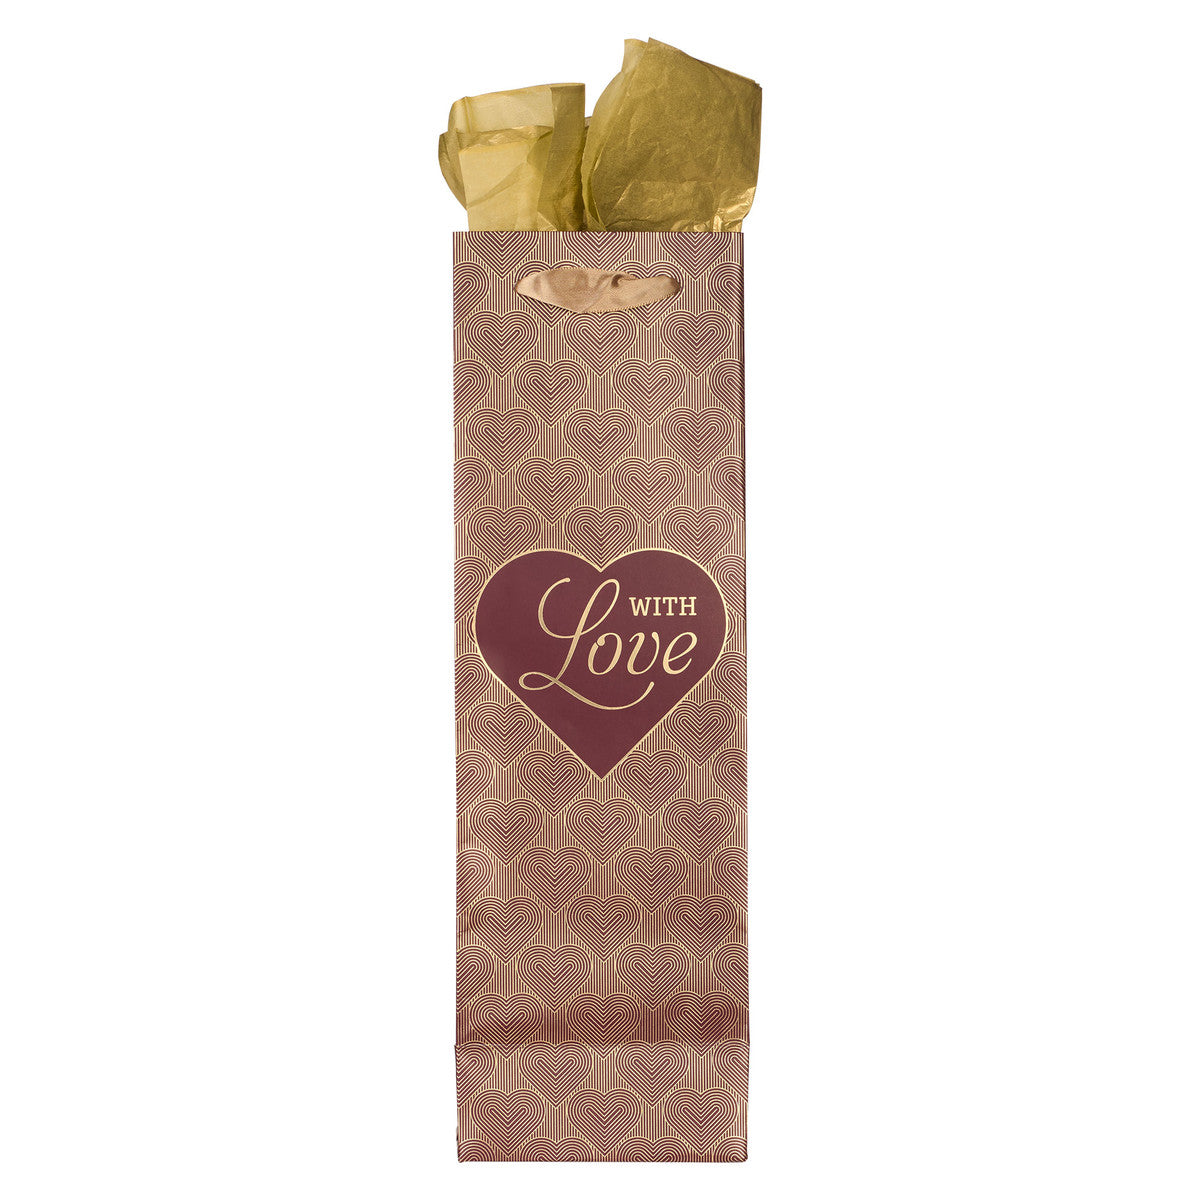 With Love Burgundy and Gold Bottle Gift Bag - The Christian Gift Company